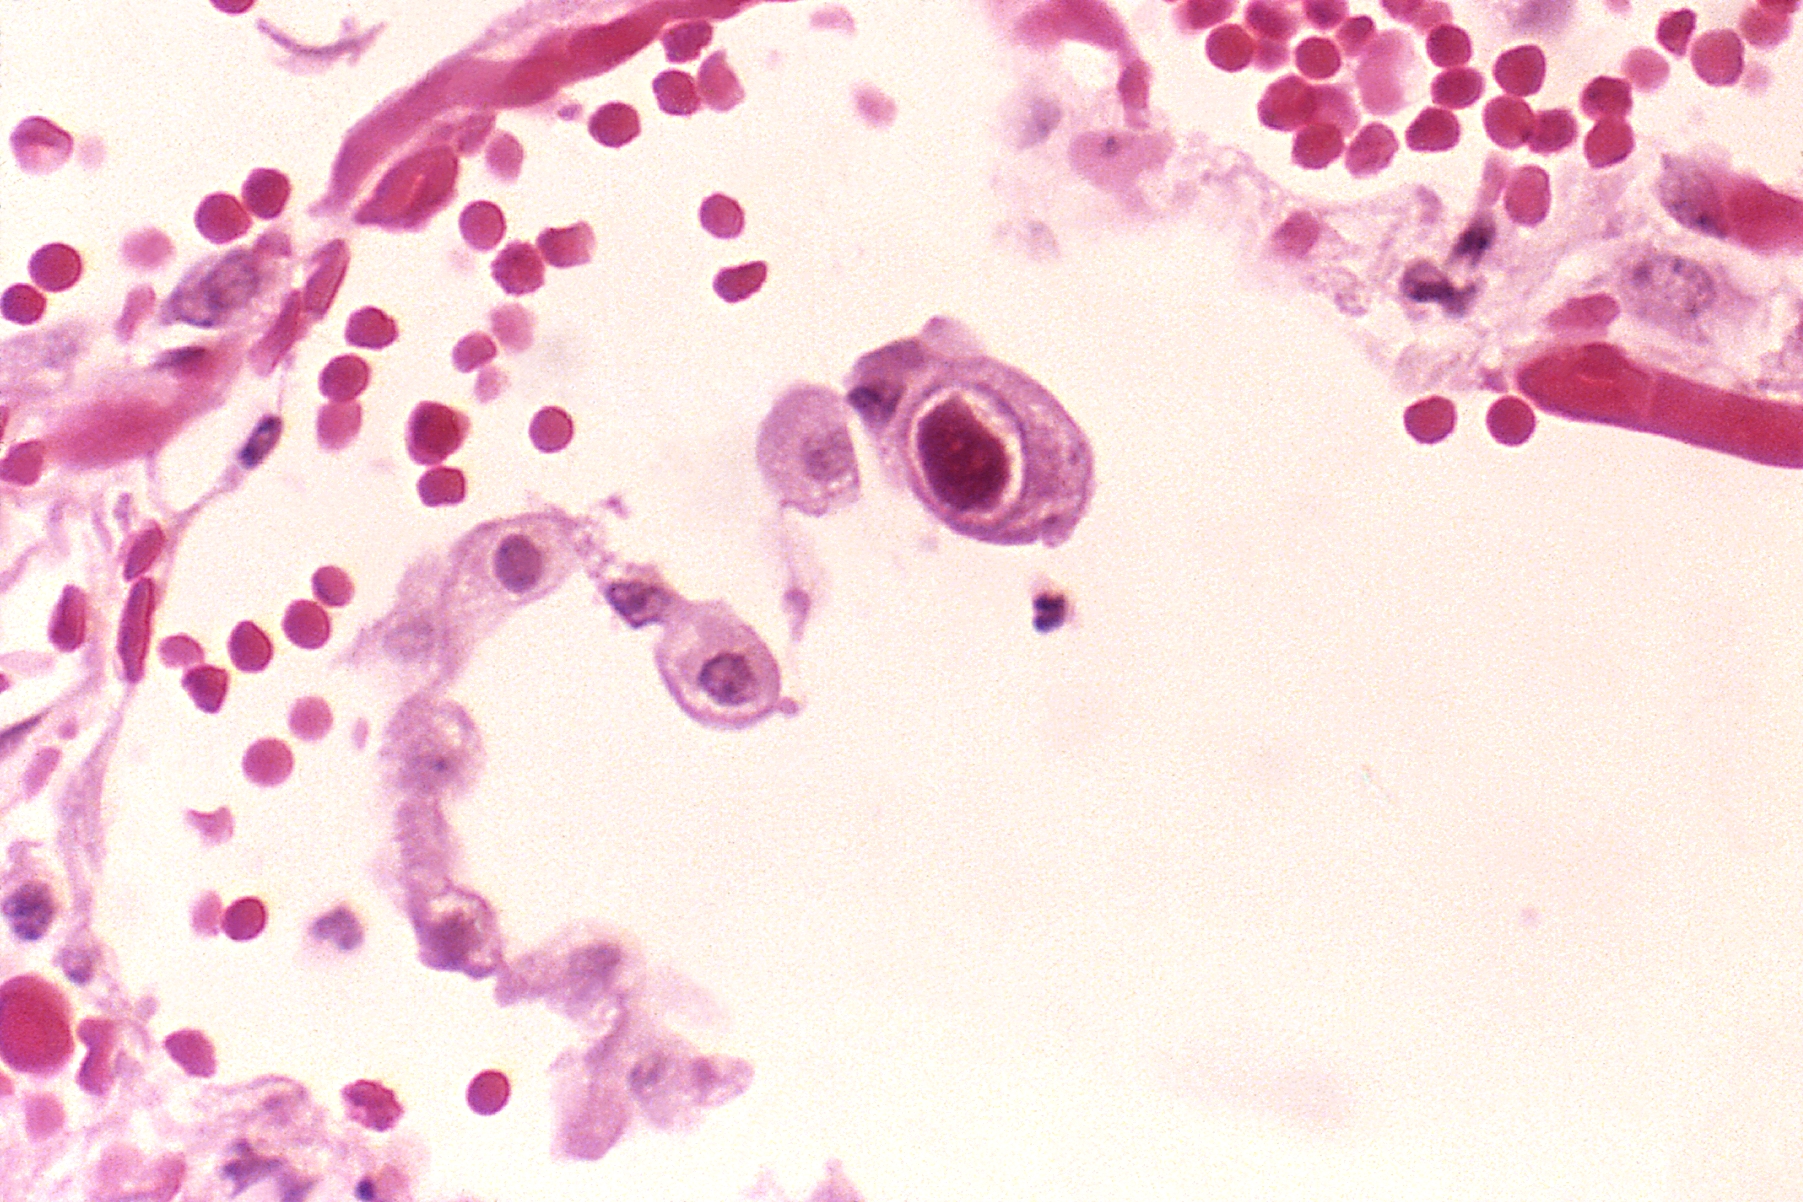 File:Cytomegalovirus 01 - By Transferred from en.wikipedia to Commons.This media comes from the Centers for Disease Control and Prevention's Public Health Image Library (PHIL), with identification number -958.Note Not all PHIL images.jpg